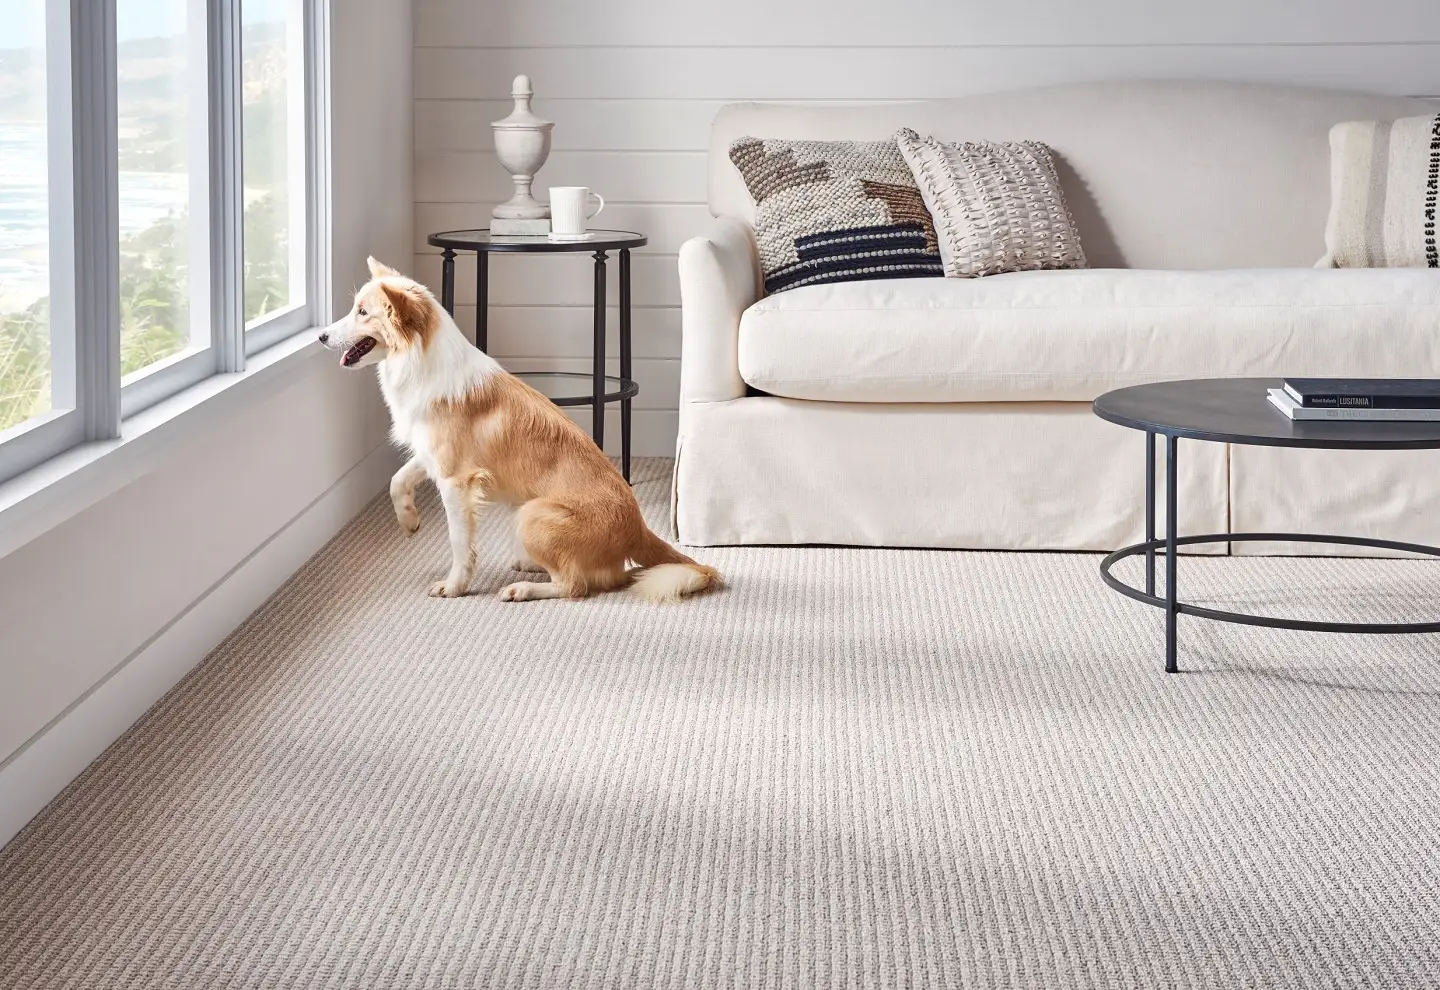 The Best Flooring Color to Hide Dog Hair: Practical Tips for Pet-Friendly Homes